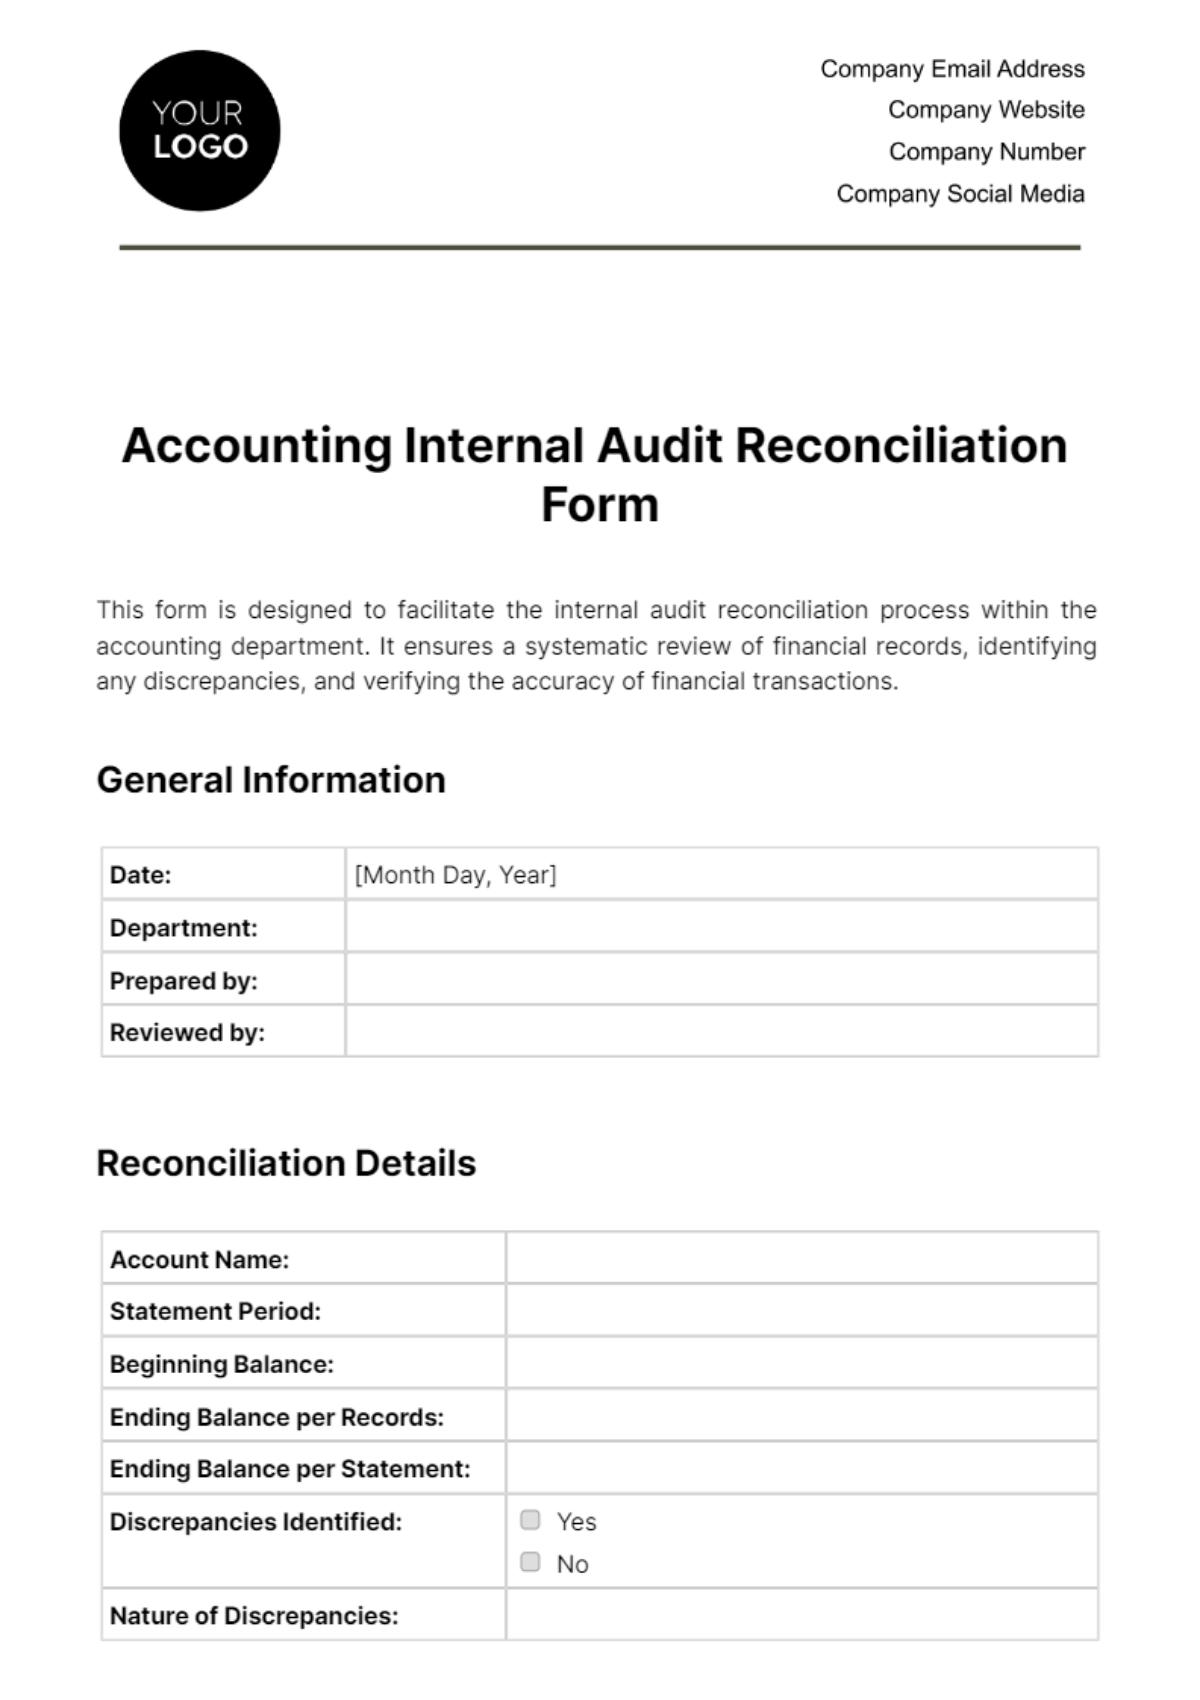 Free Accounting Internal Audit Reconciliation Form Template